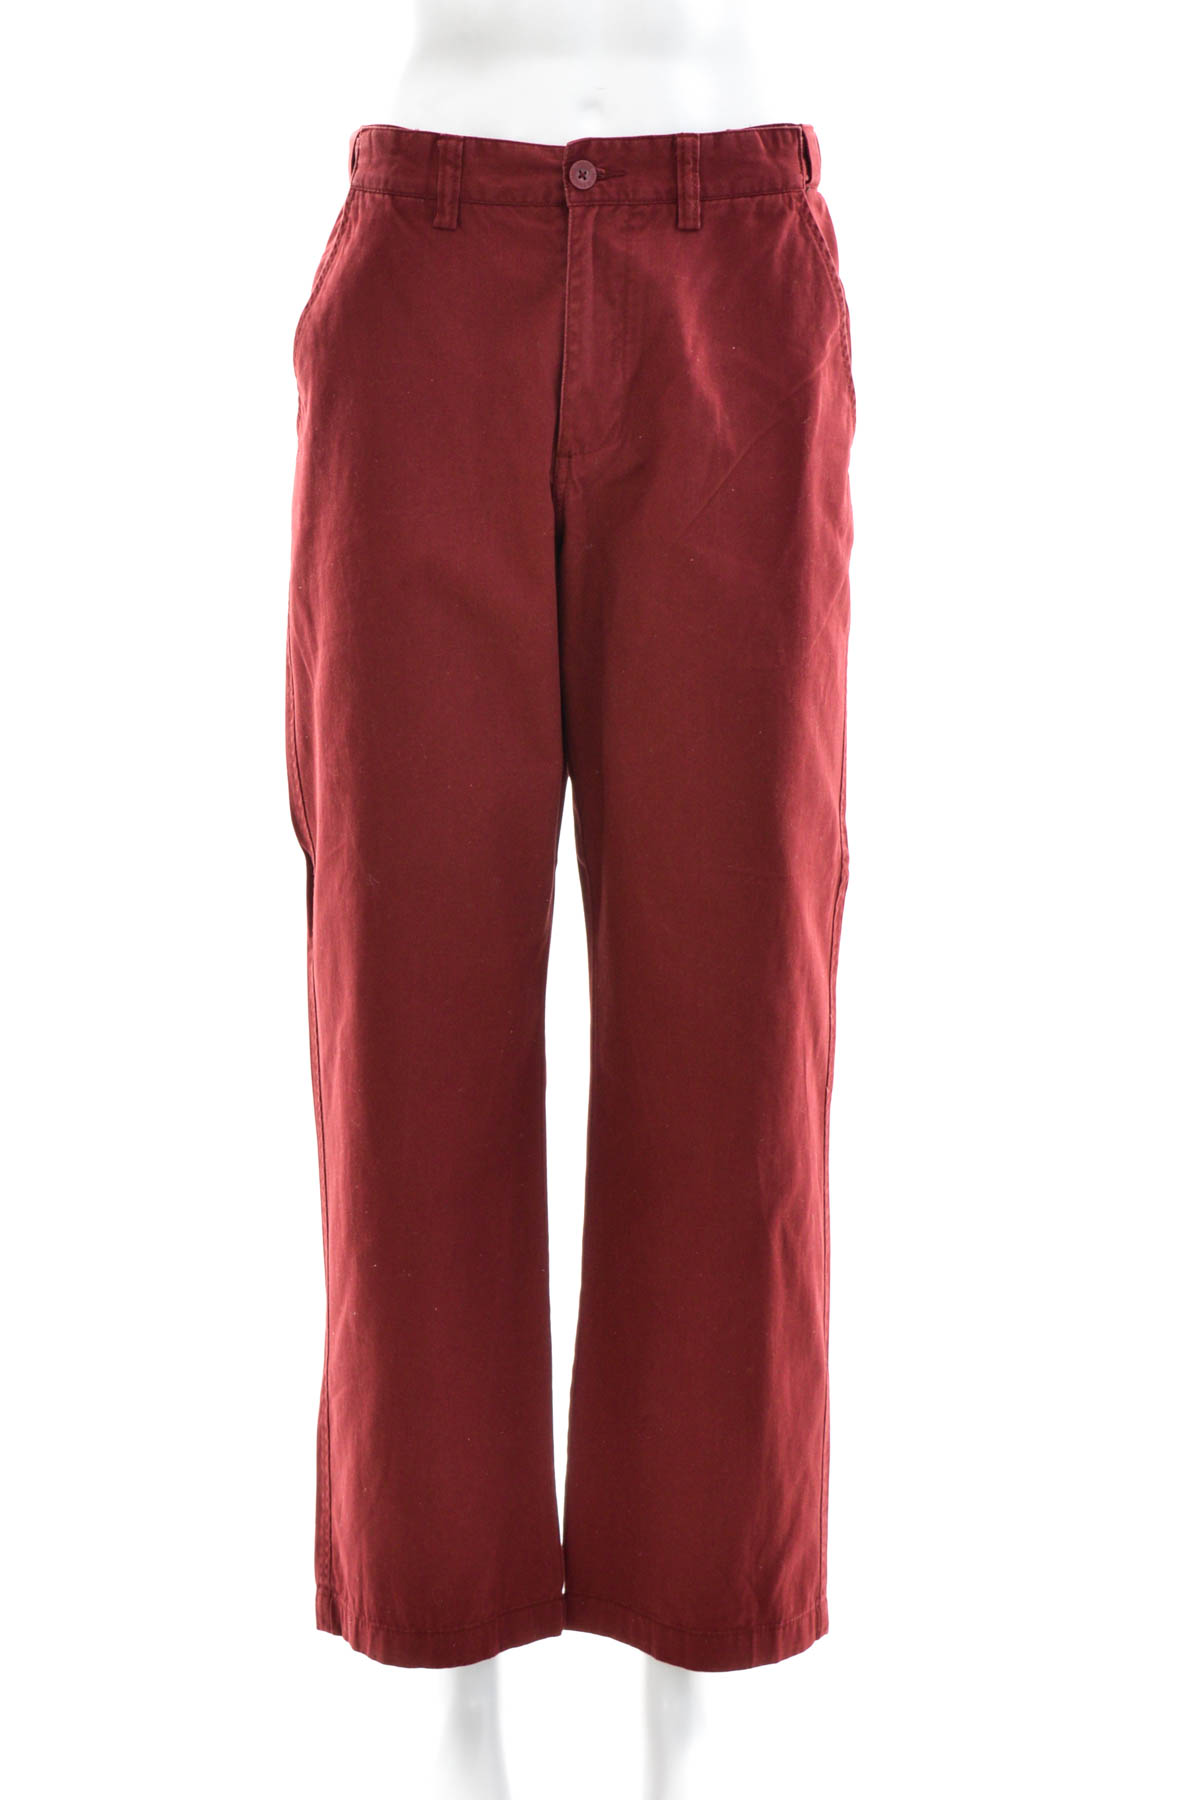 Men's trousers - MAINE NEW ENGLAND - 0